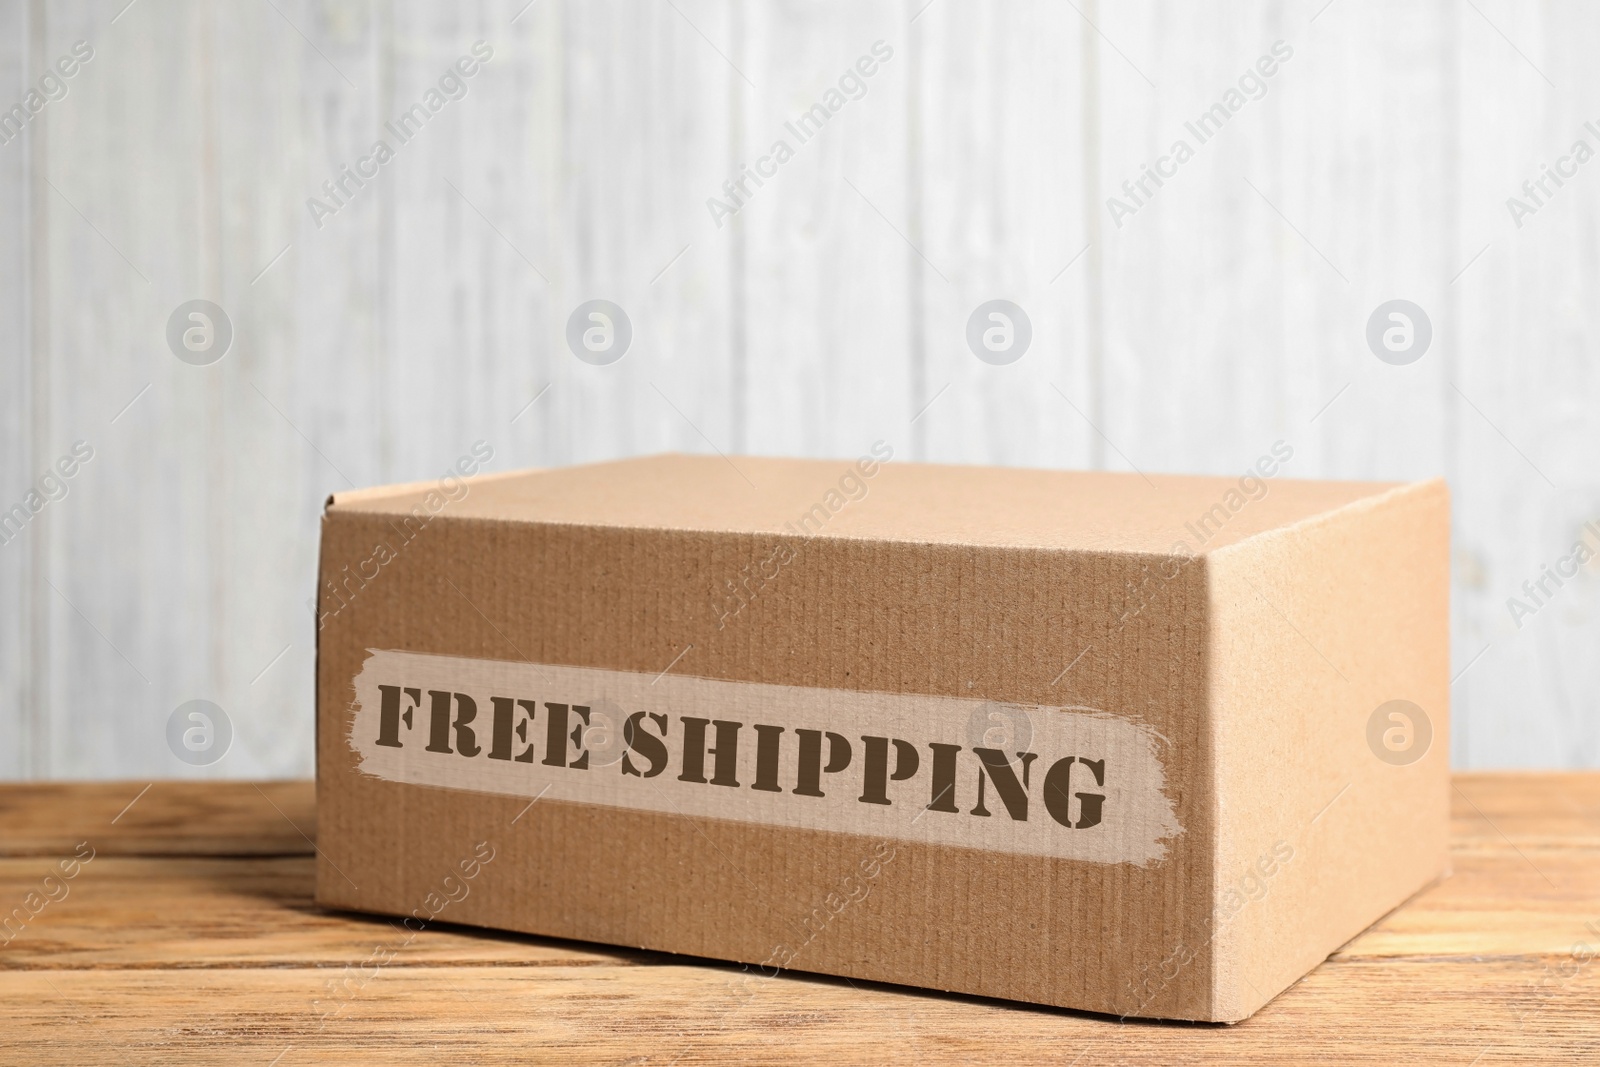 Image of Cardboard box on wooden table against white background. Free shipping